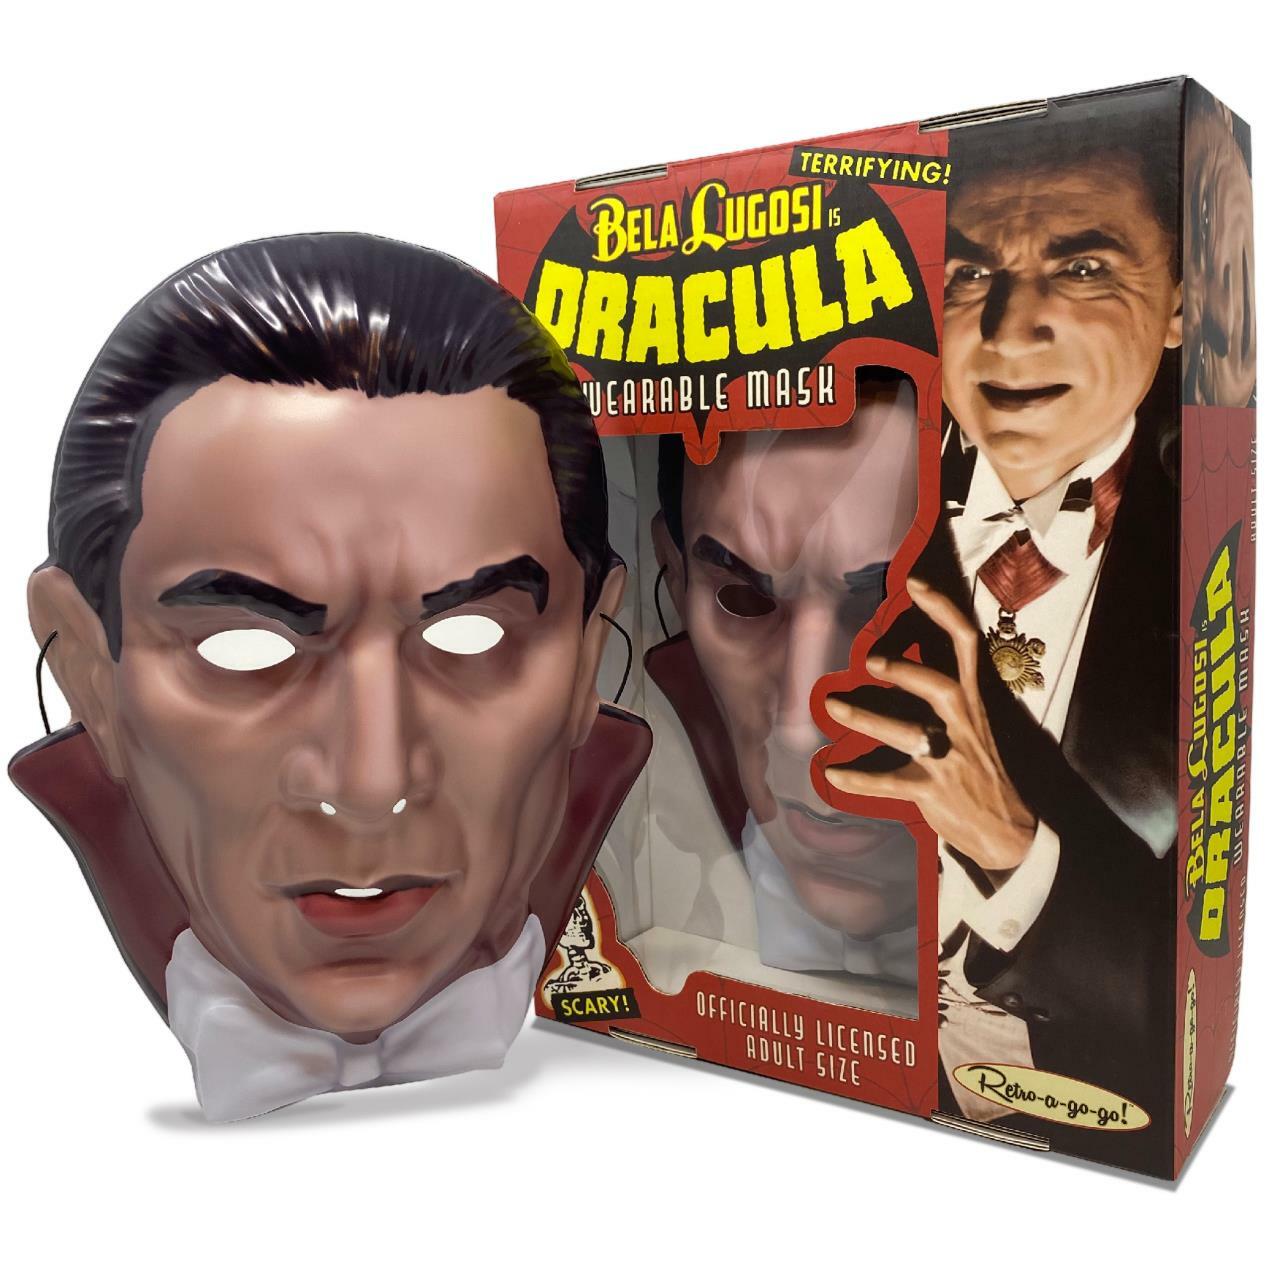 A fully wearable color mask of Bela Lugosi as Dracula next to its packaging